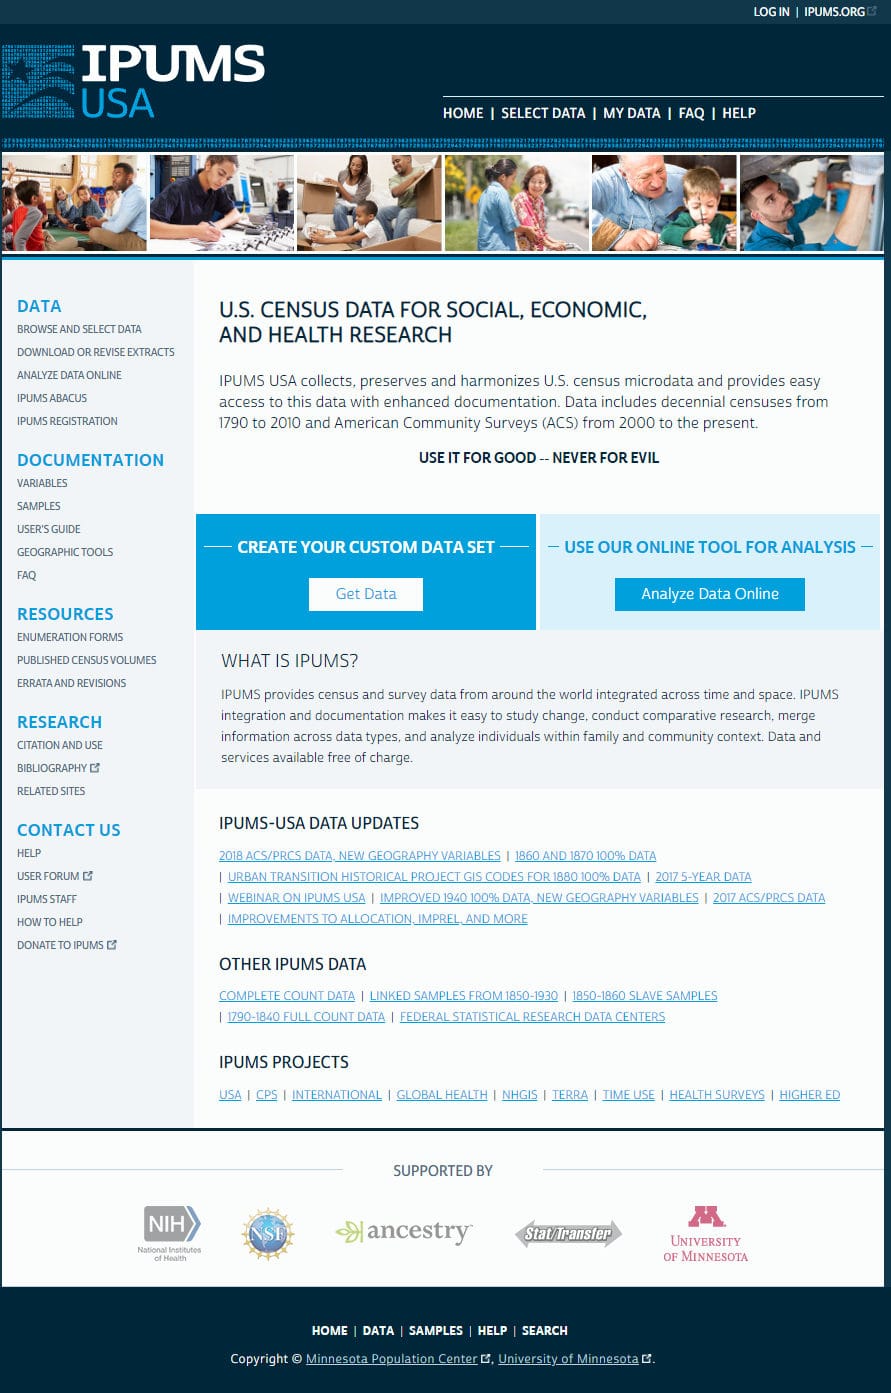 US Census Data for Social, Economic, and Health Research